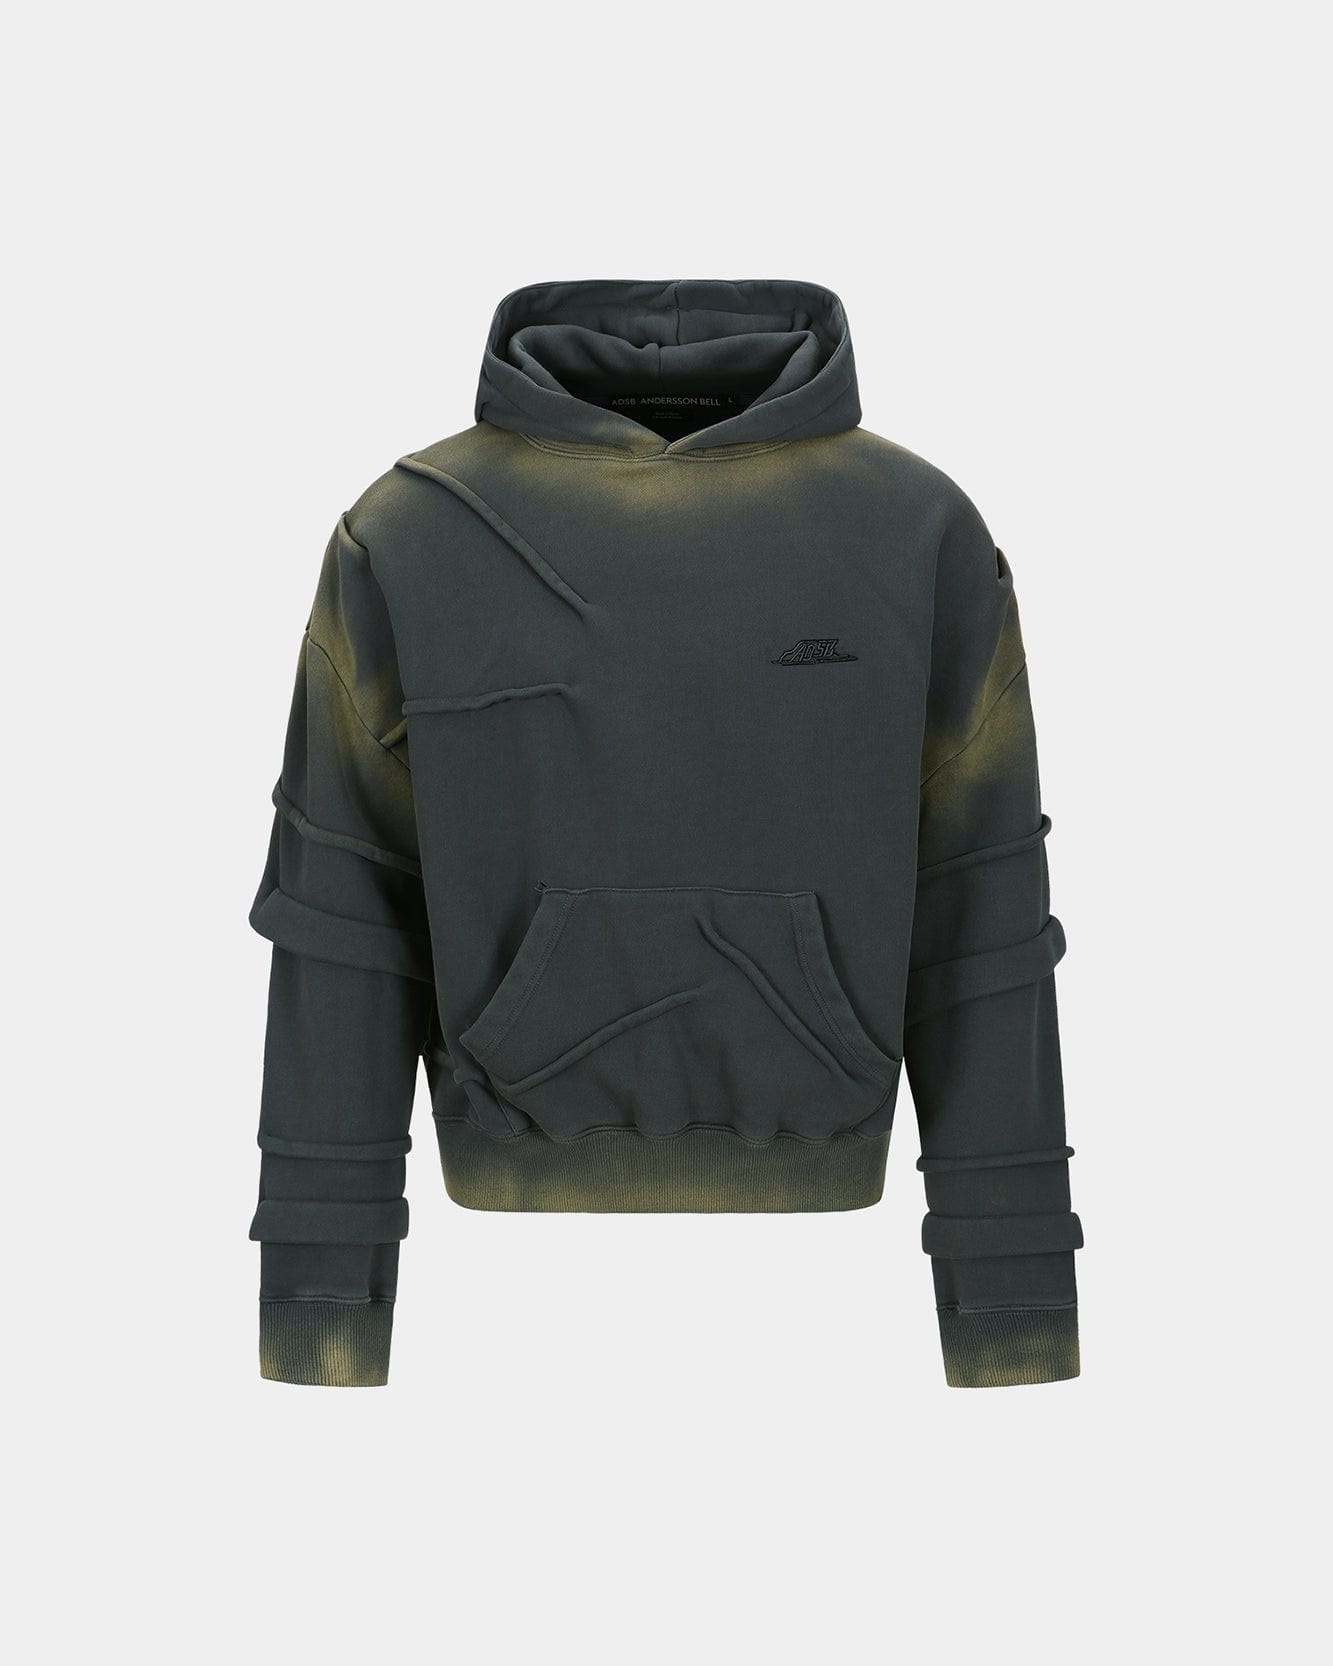 Andersson Bell MARDRO GRADIENT HOODIE atb1080m(CHARCOAL)